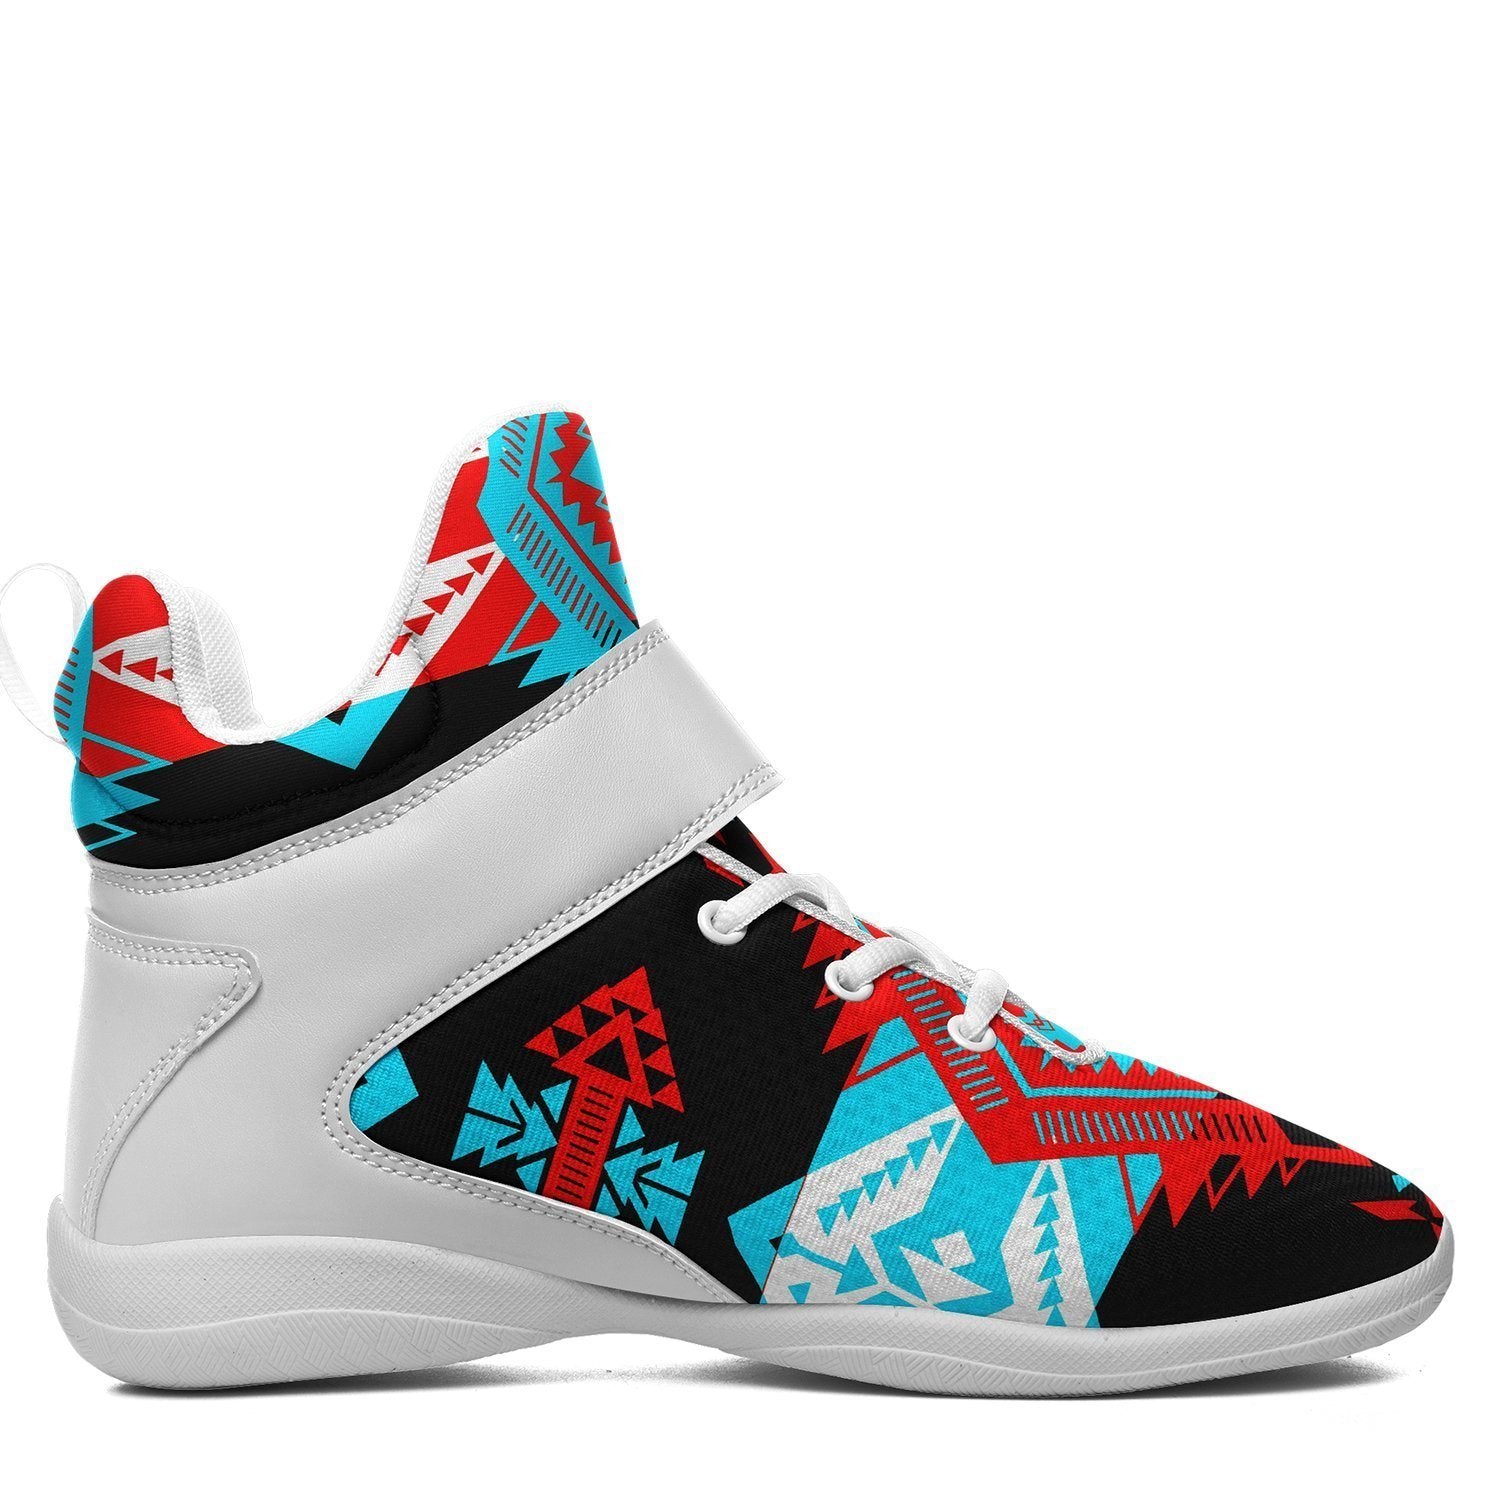 Sovereign Nation Trade Kid's Ipottaa Basketball / Sport High Top Shoes 49 Dzine 